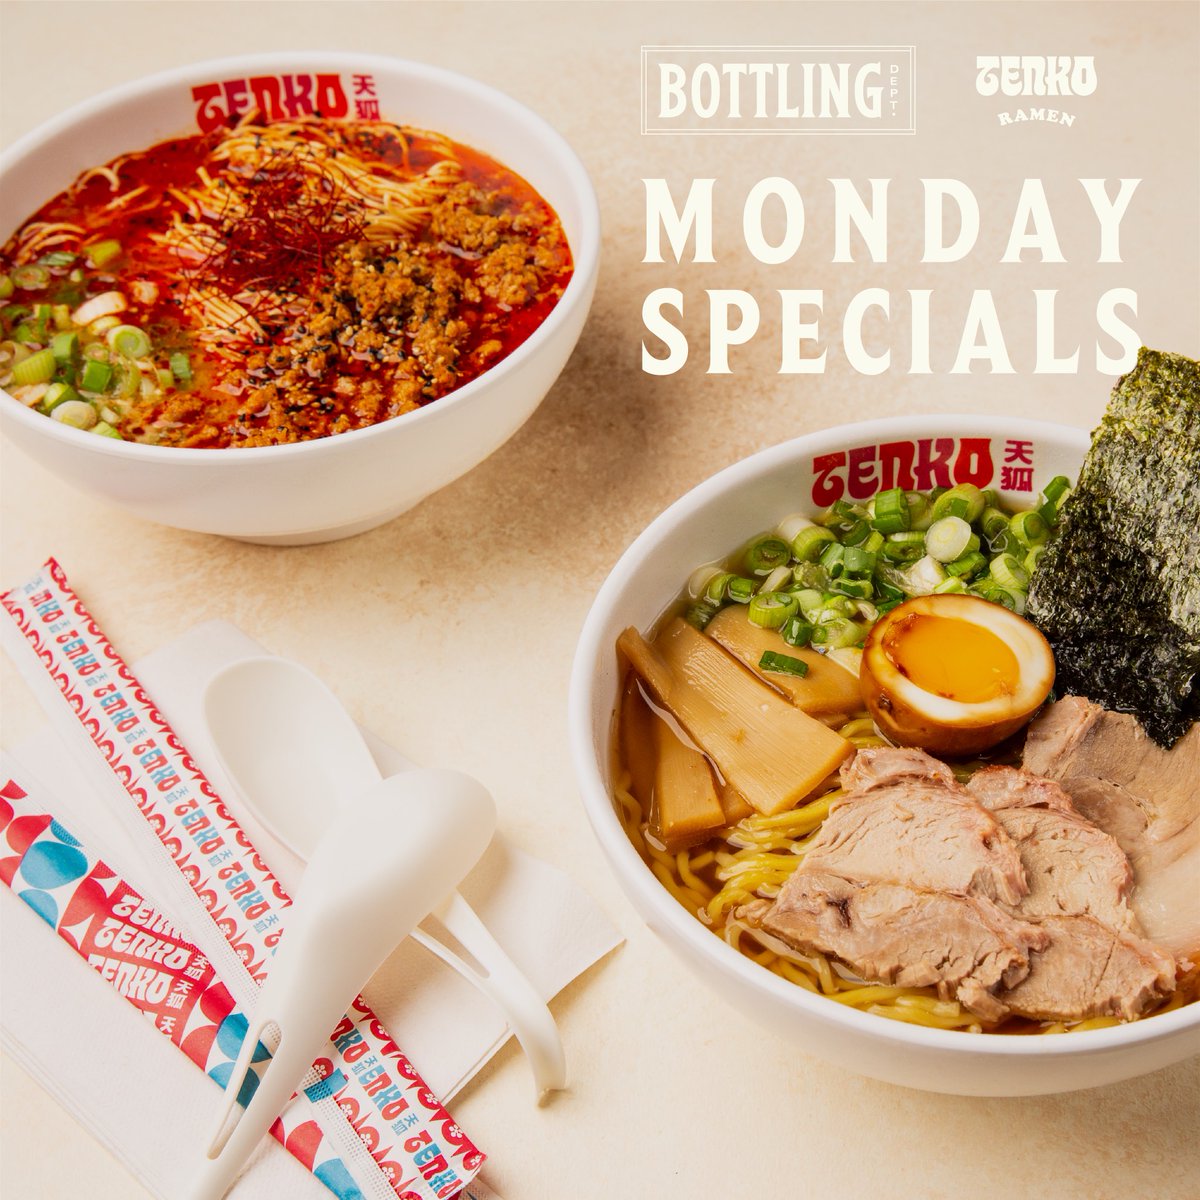 Did you know that at @tenko_ramen you can get any two ramens for $20 on Mondays at @bottlingdept? What originally began as a pop-up, Jennifer Dobbertin and Quealy Watson brought well-loved Tenko Ramen to the Bottling Department in the summer of 2017.